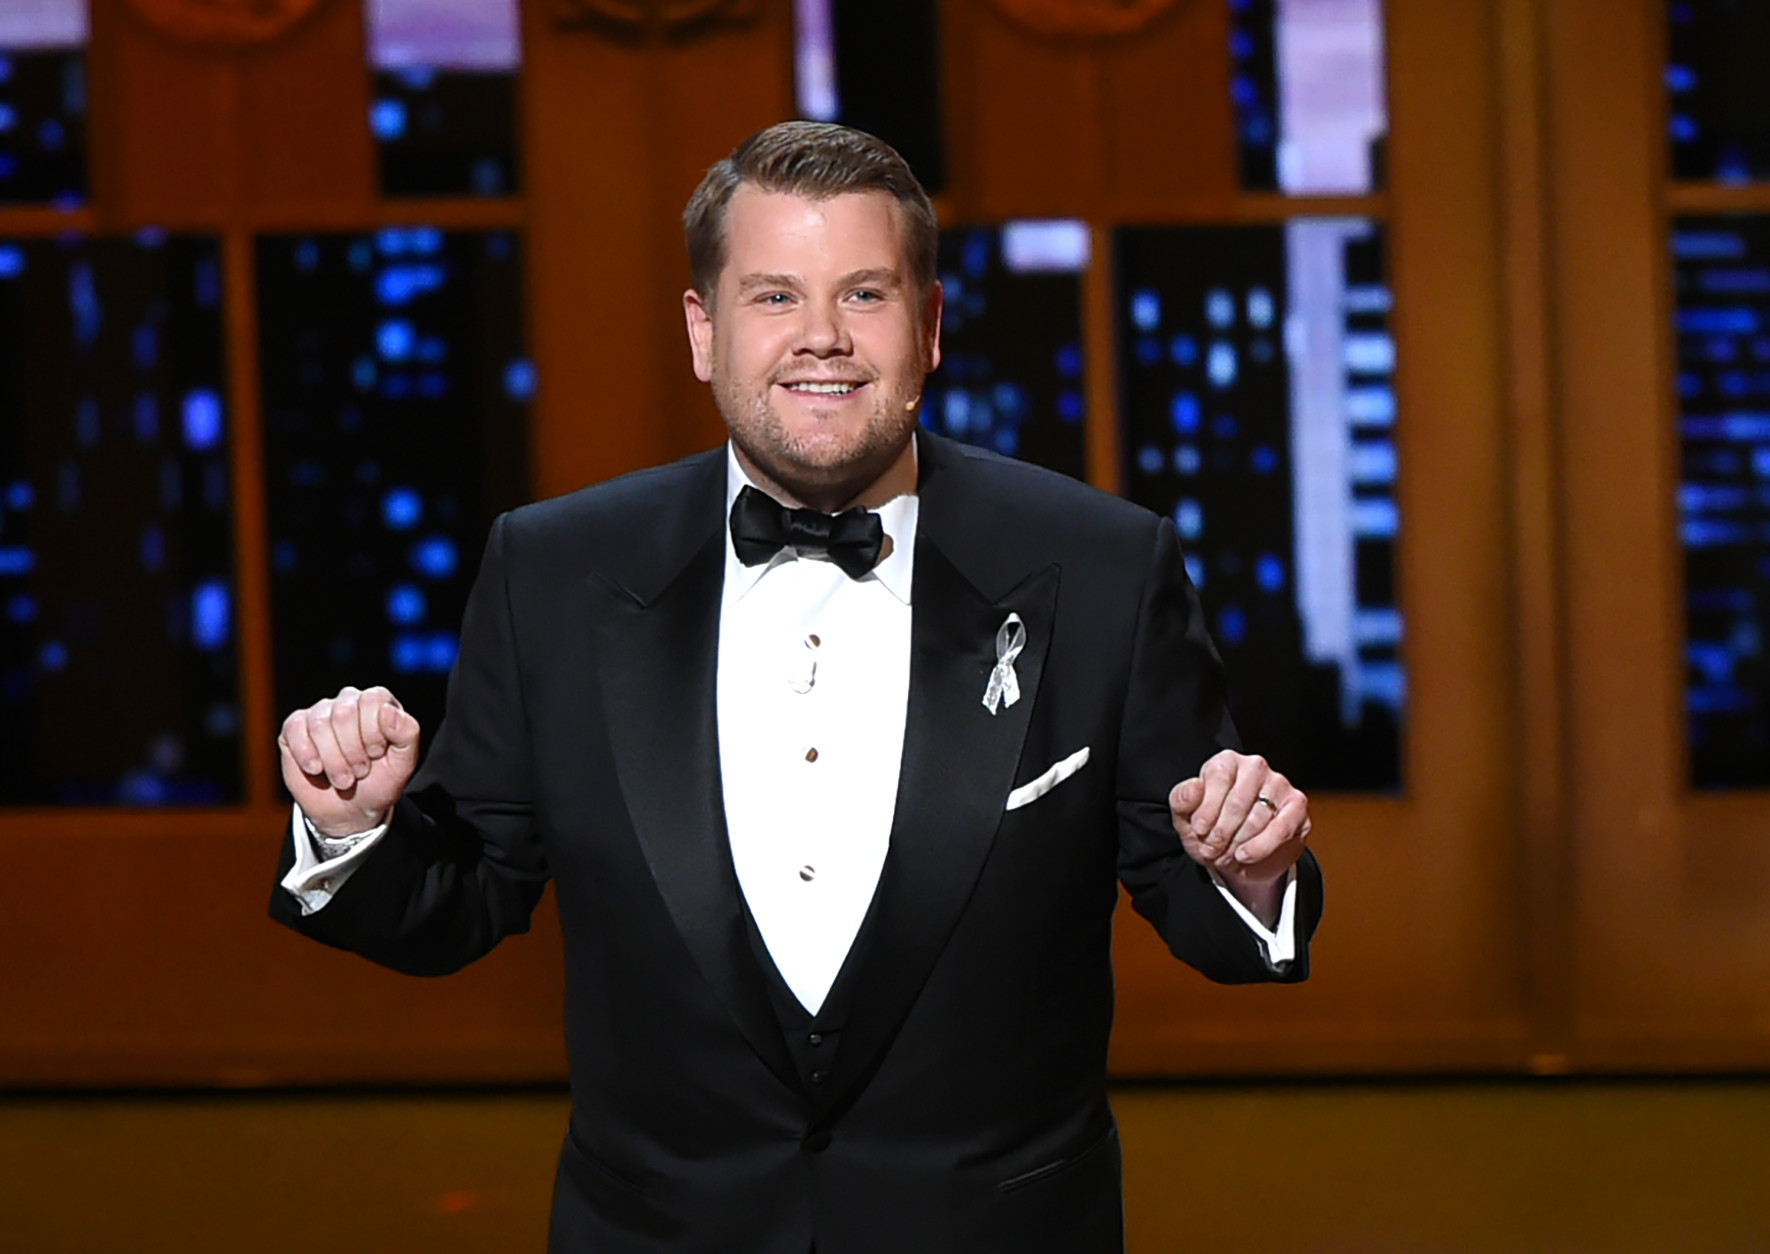 James Corden performs at the Tony Awards at the Beacon Theatre on Sunday, June 12, 2016, in New York. (Photo by Evan Agostini/Invision/AP)